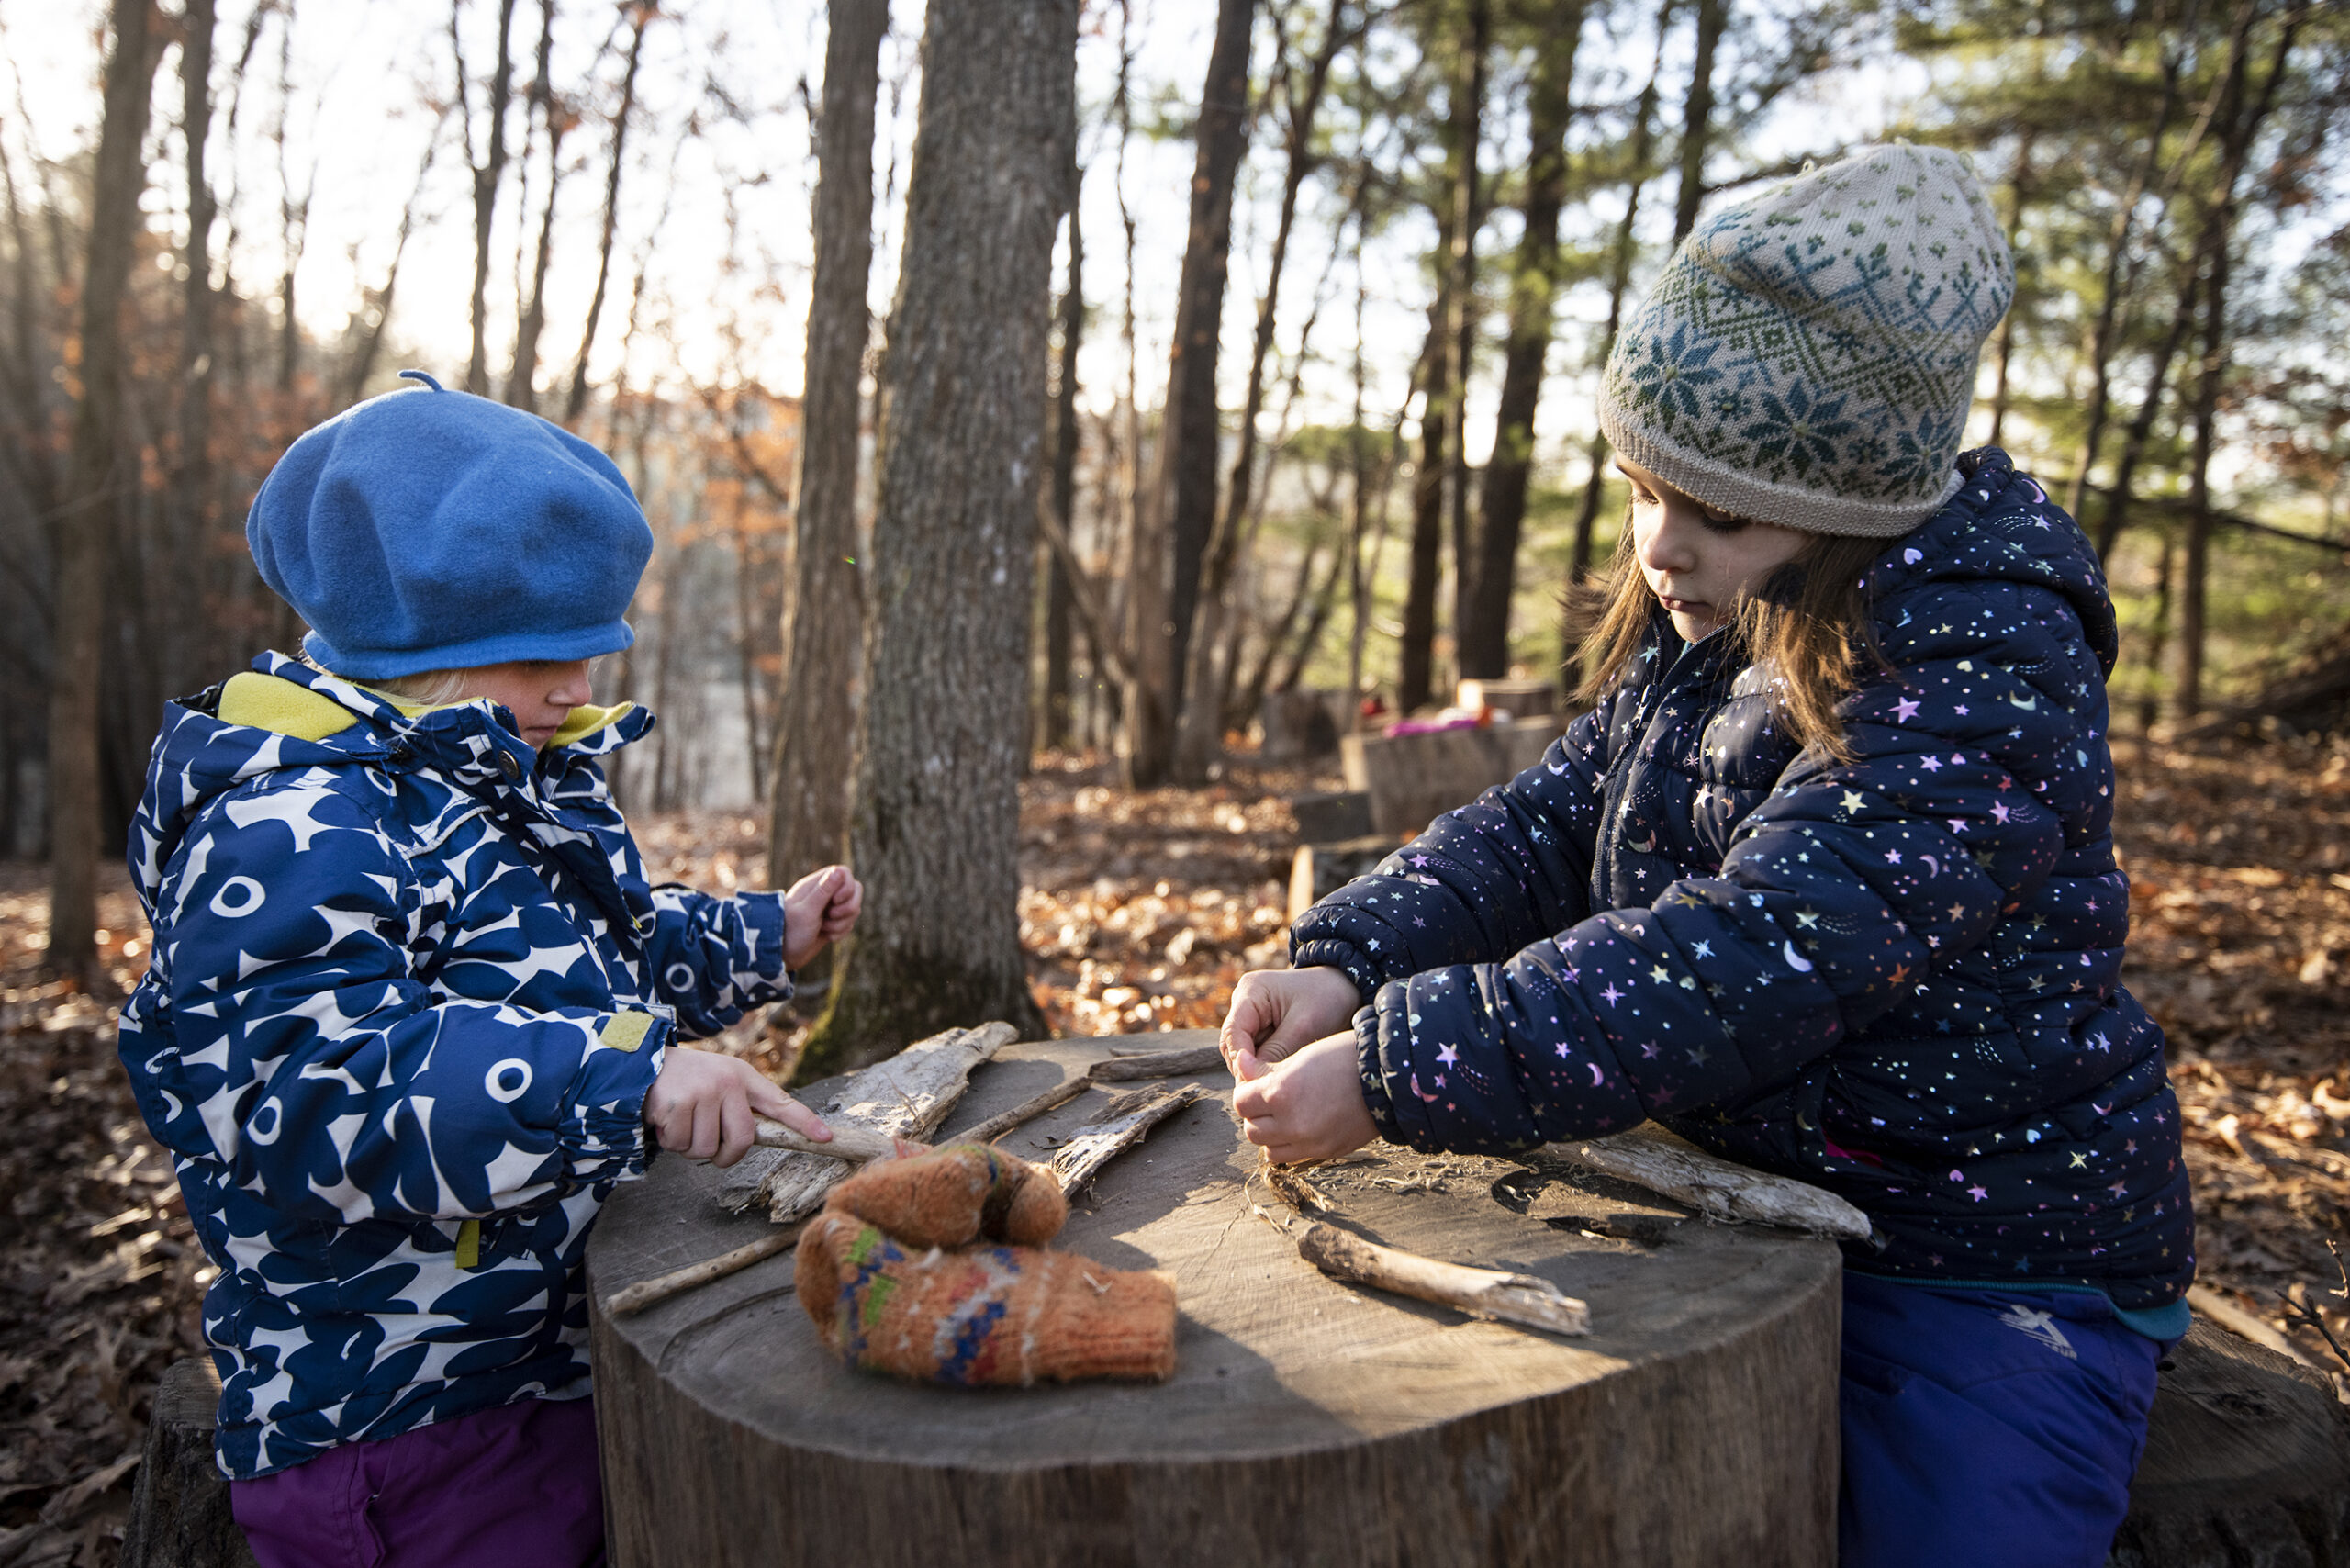 Two girls in winter coats and hats play at a tree stump